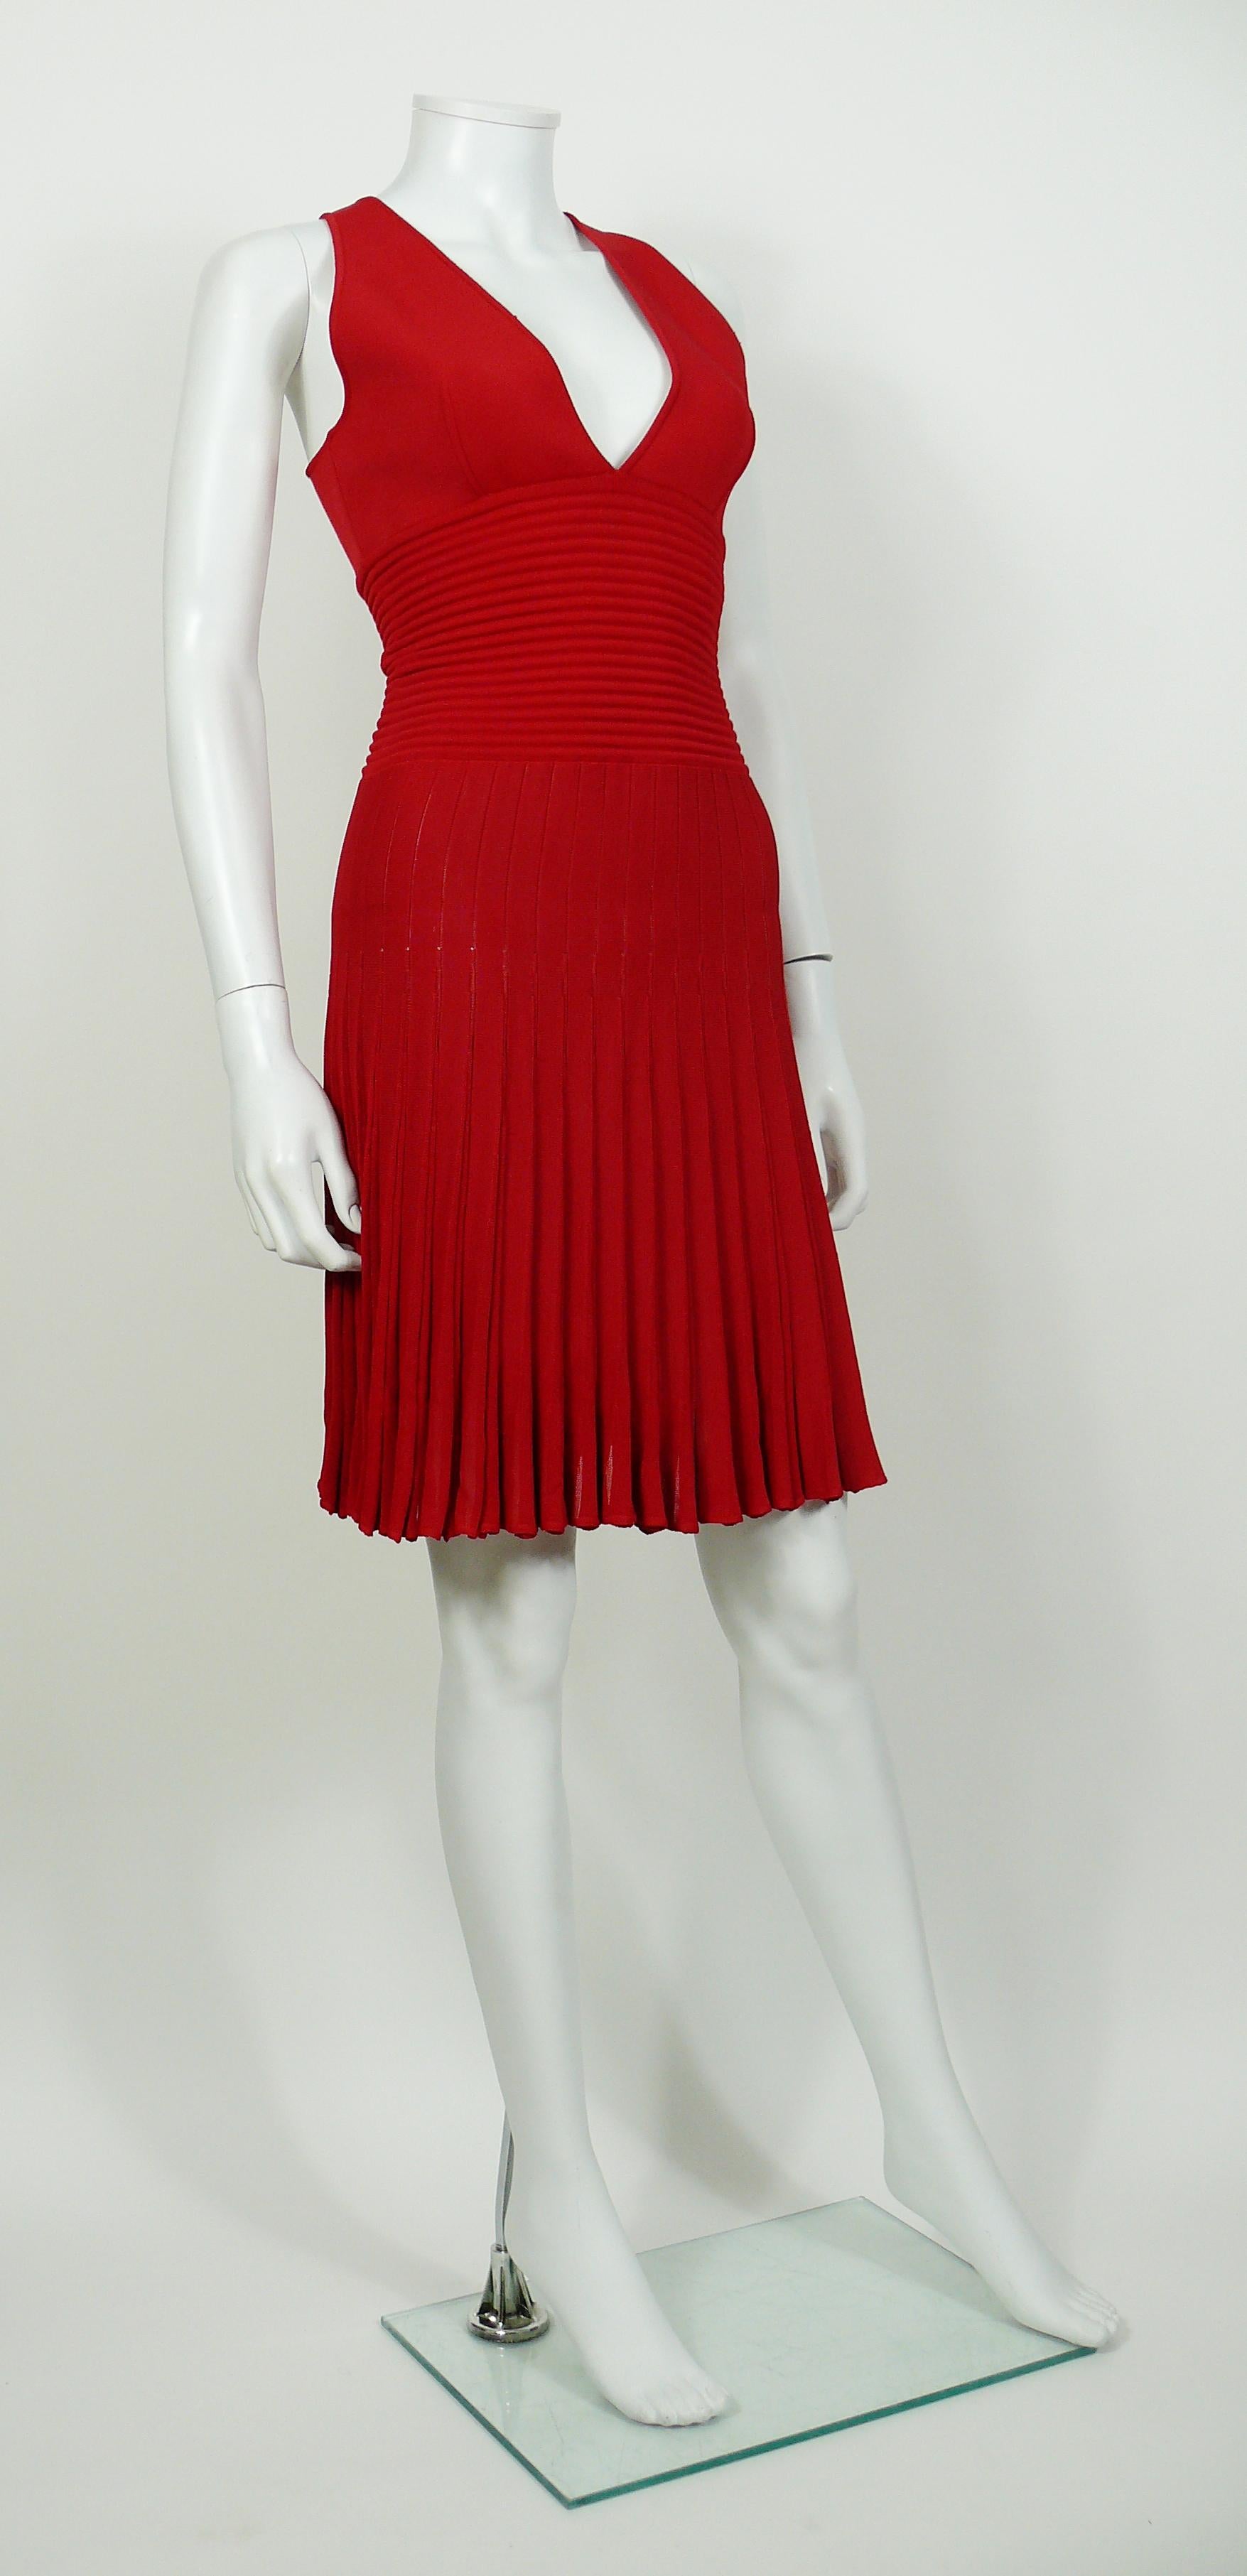 ALEXANDRE VAUTHIER sleeveless red dress.

This dress features :
- Streetchy bust and waist.
- Deep V-neckline.
- Knit lower part.
- Side zip.
- Knee length.
- Unlined.

Label reads ALEXANDRE VAUTHIER.
Hand made in France.

Size tag reads :